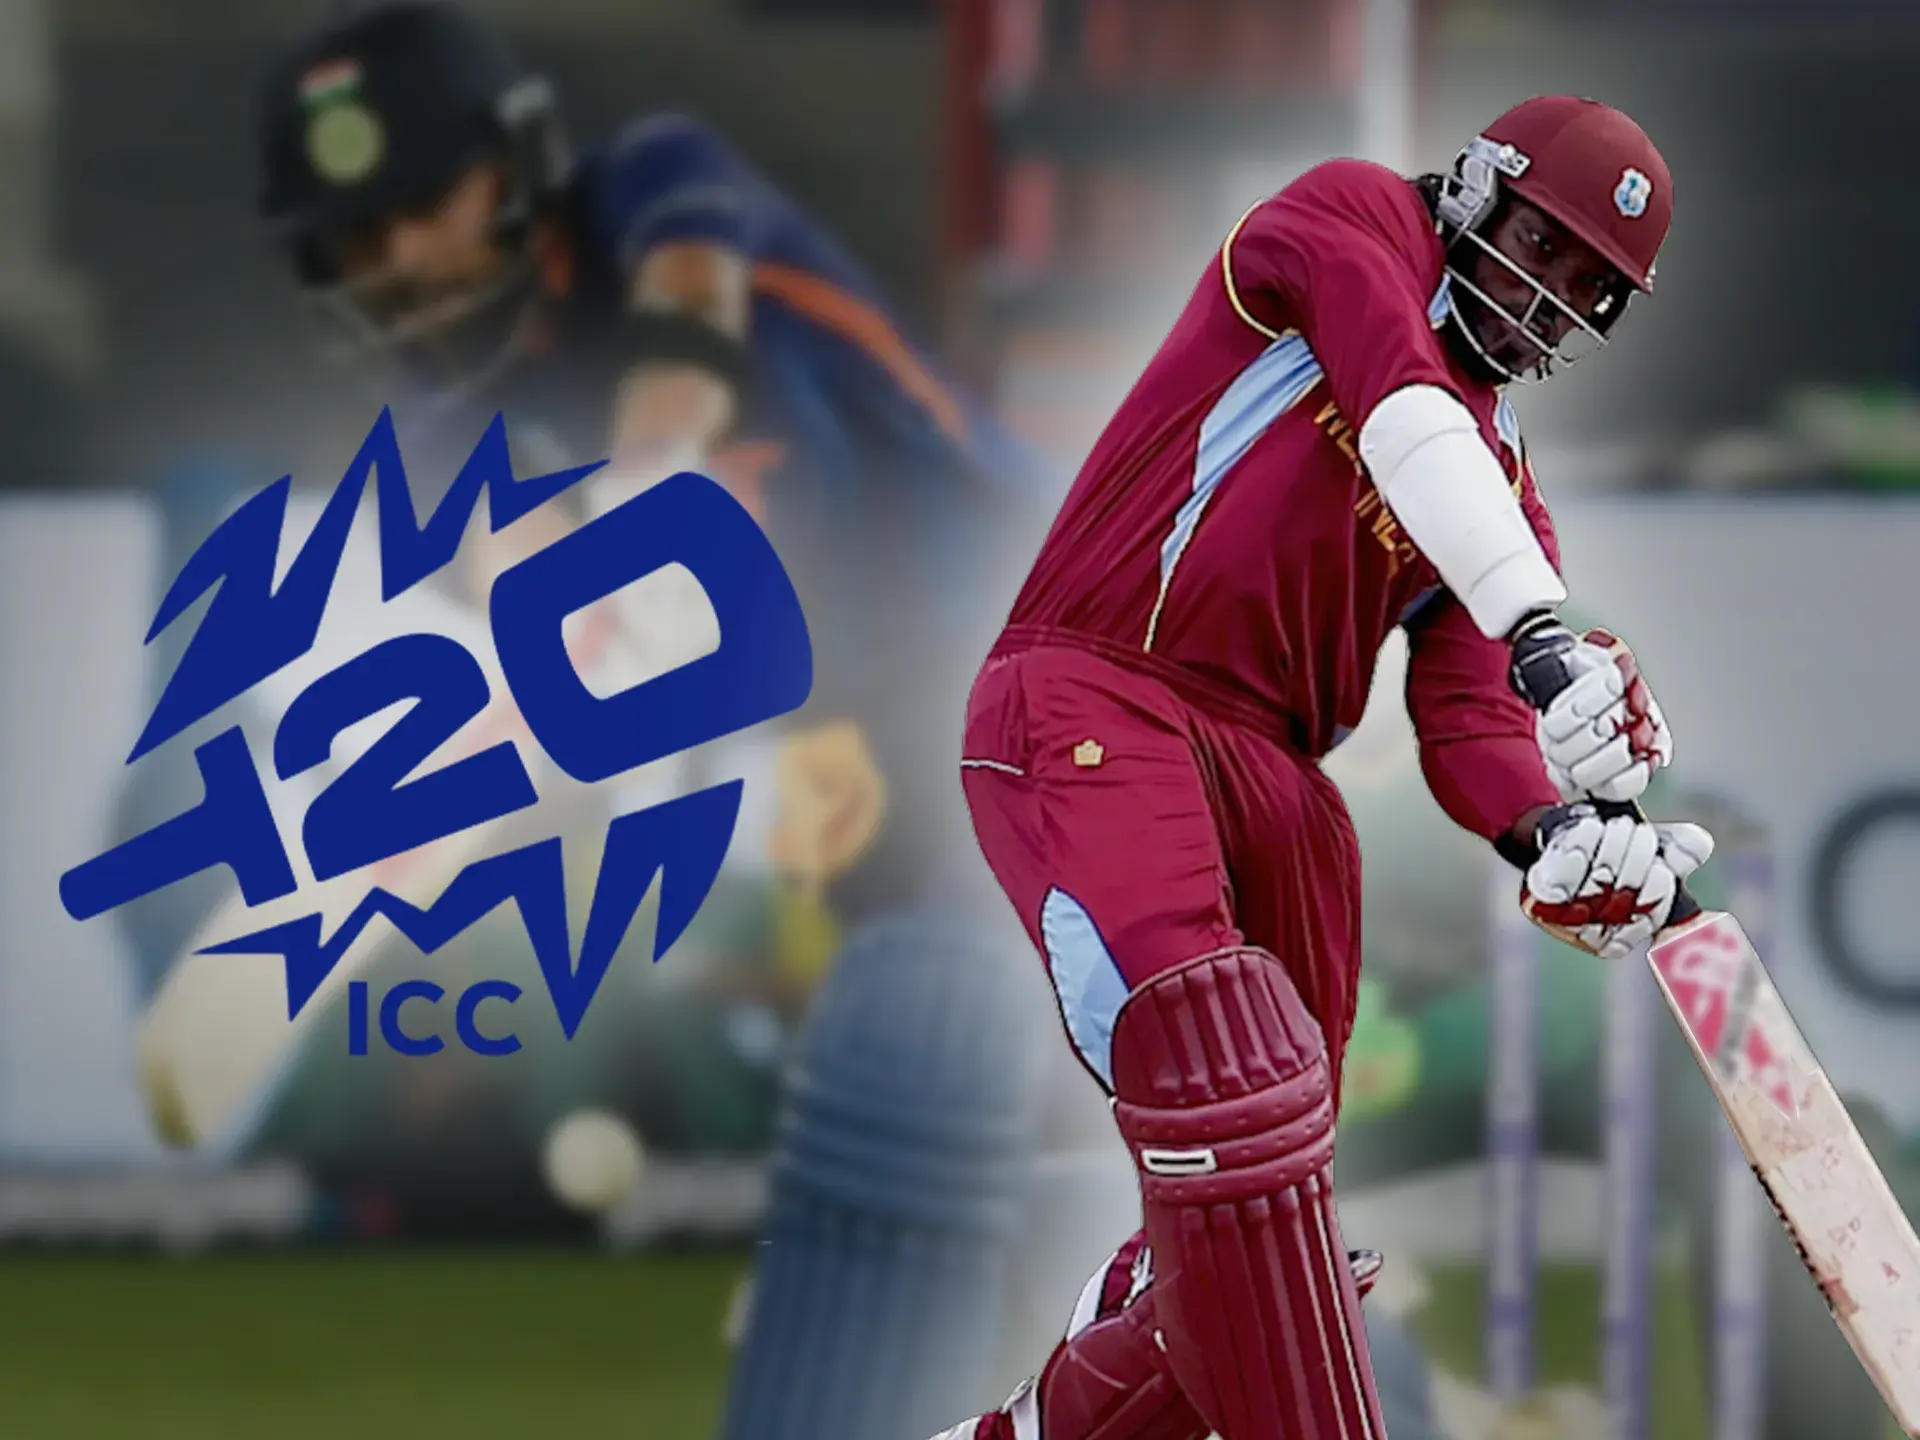 Place your bets on the annual T20 World Cup international cricket tournament.